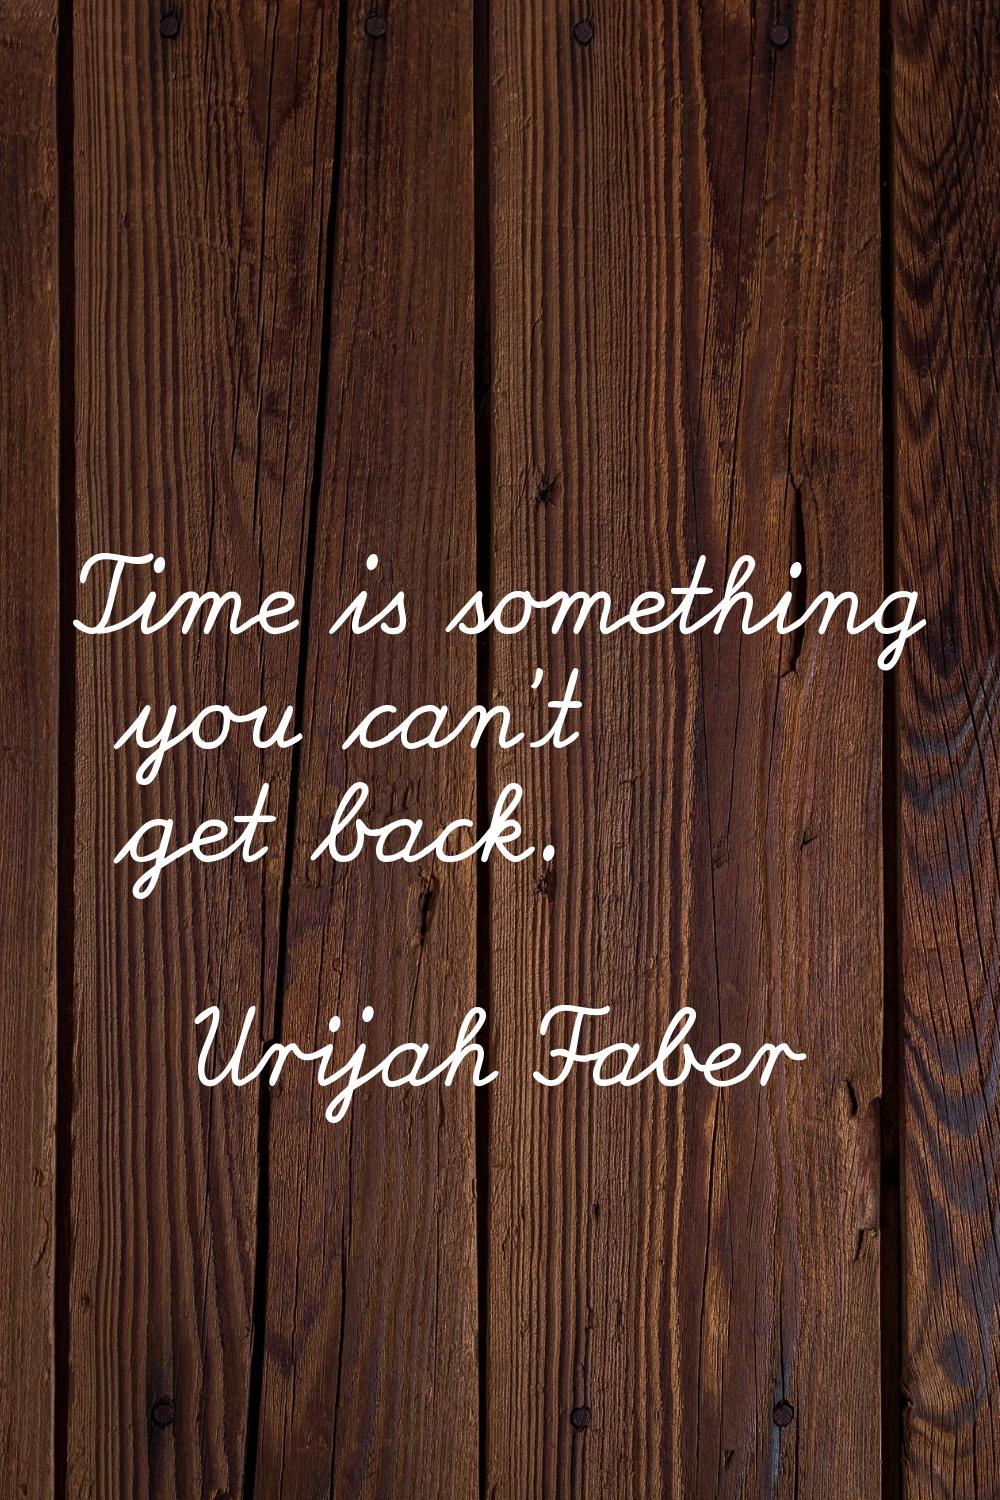 Time is something you can't get back.